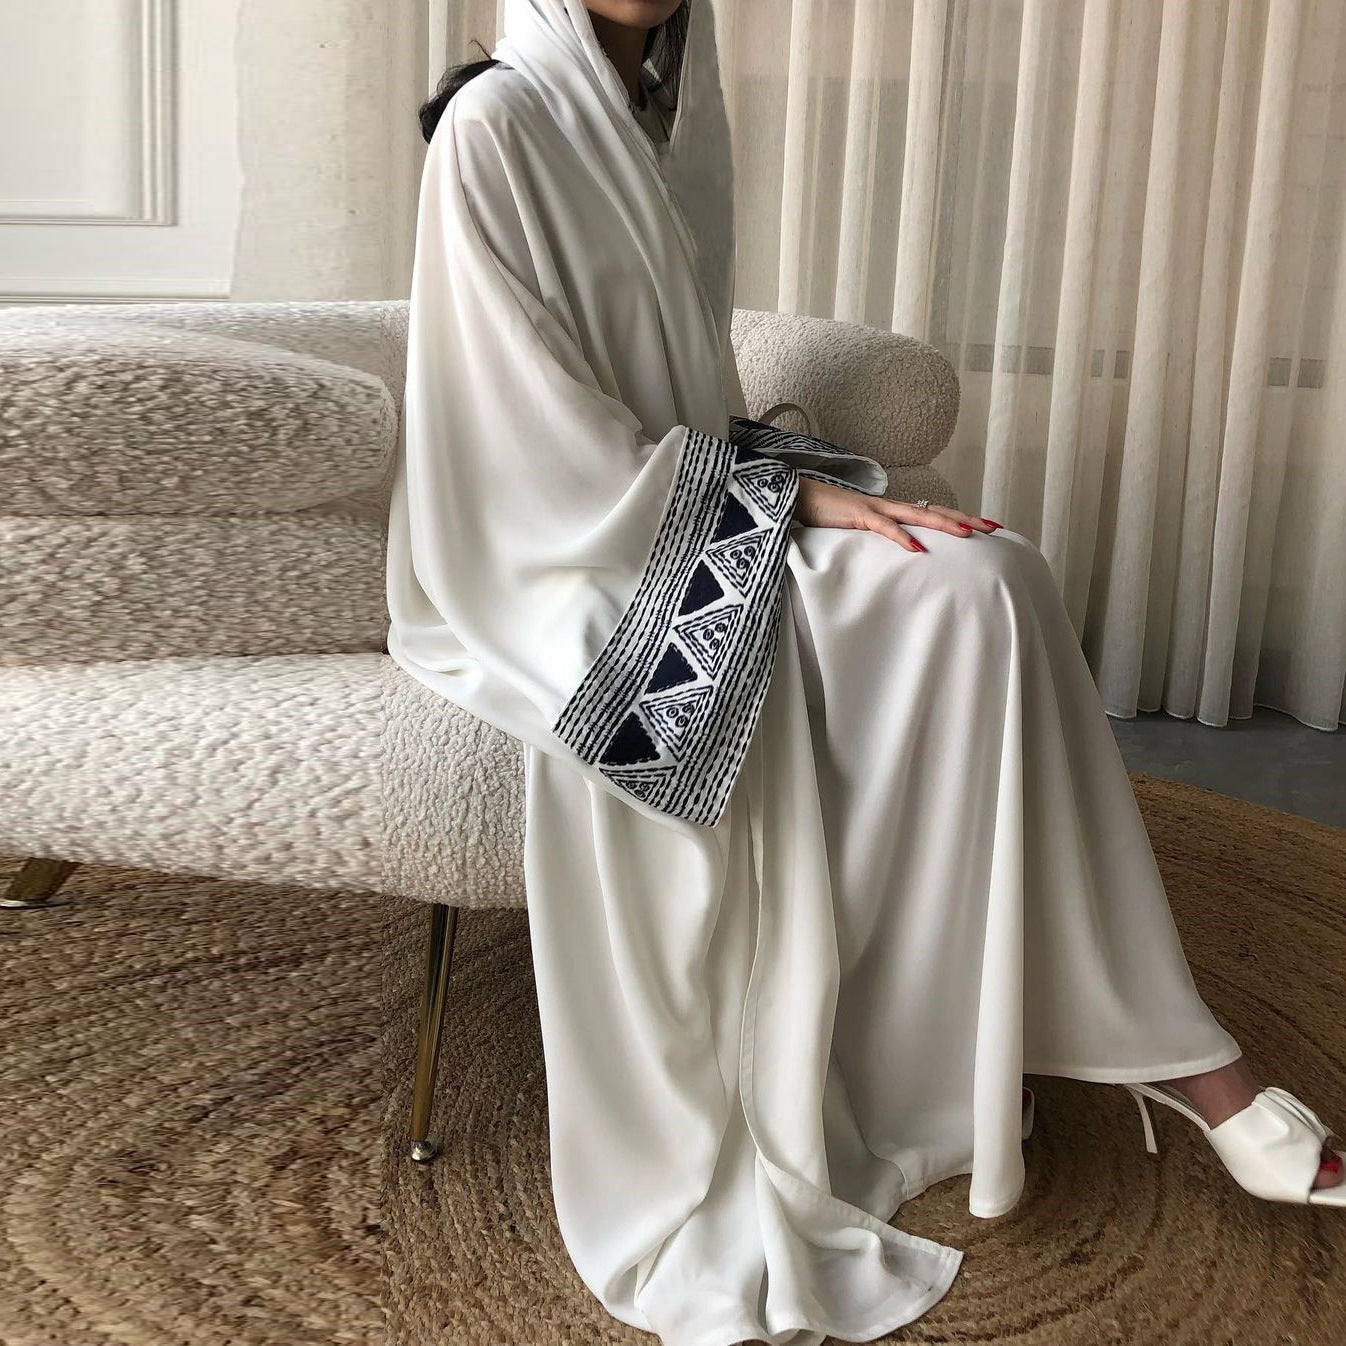 Women's Personalized Embroidered Fashion Robe